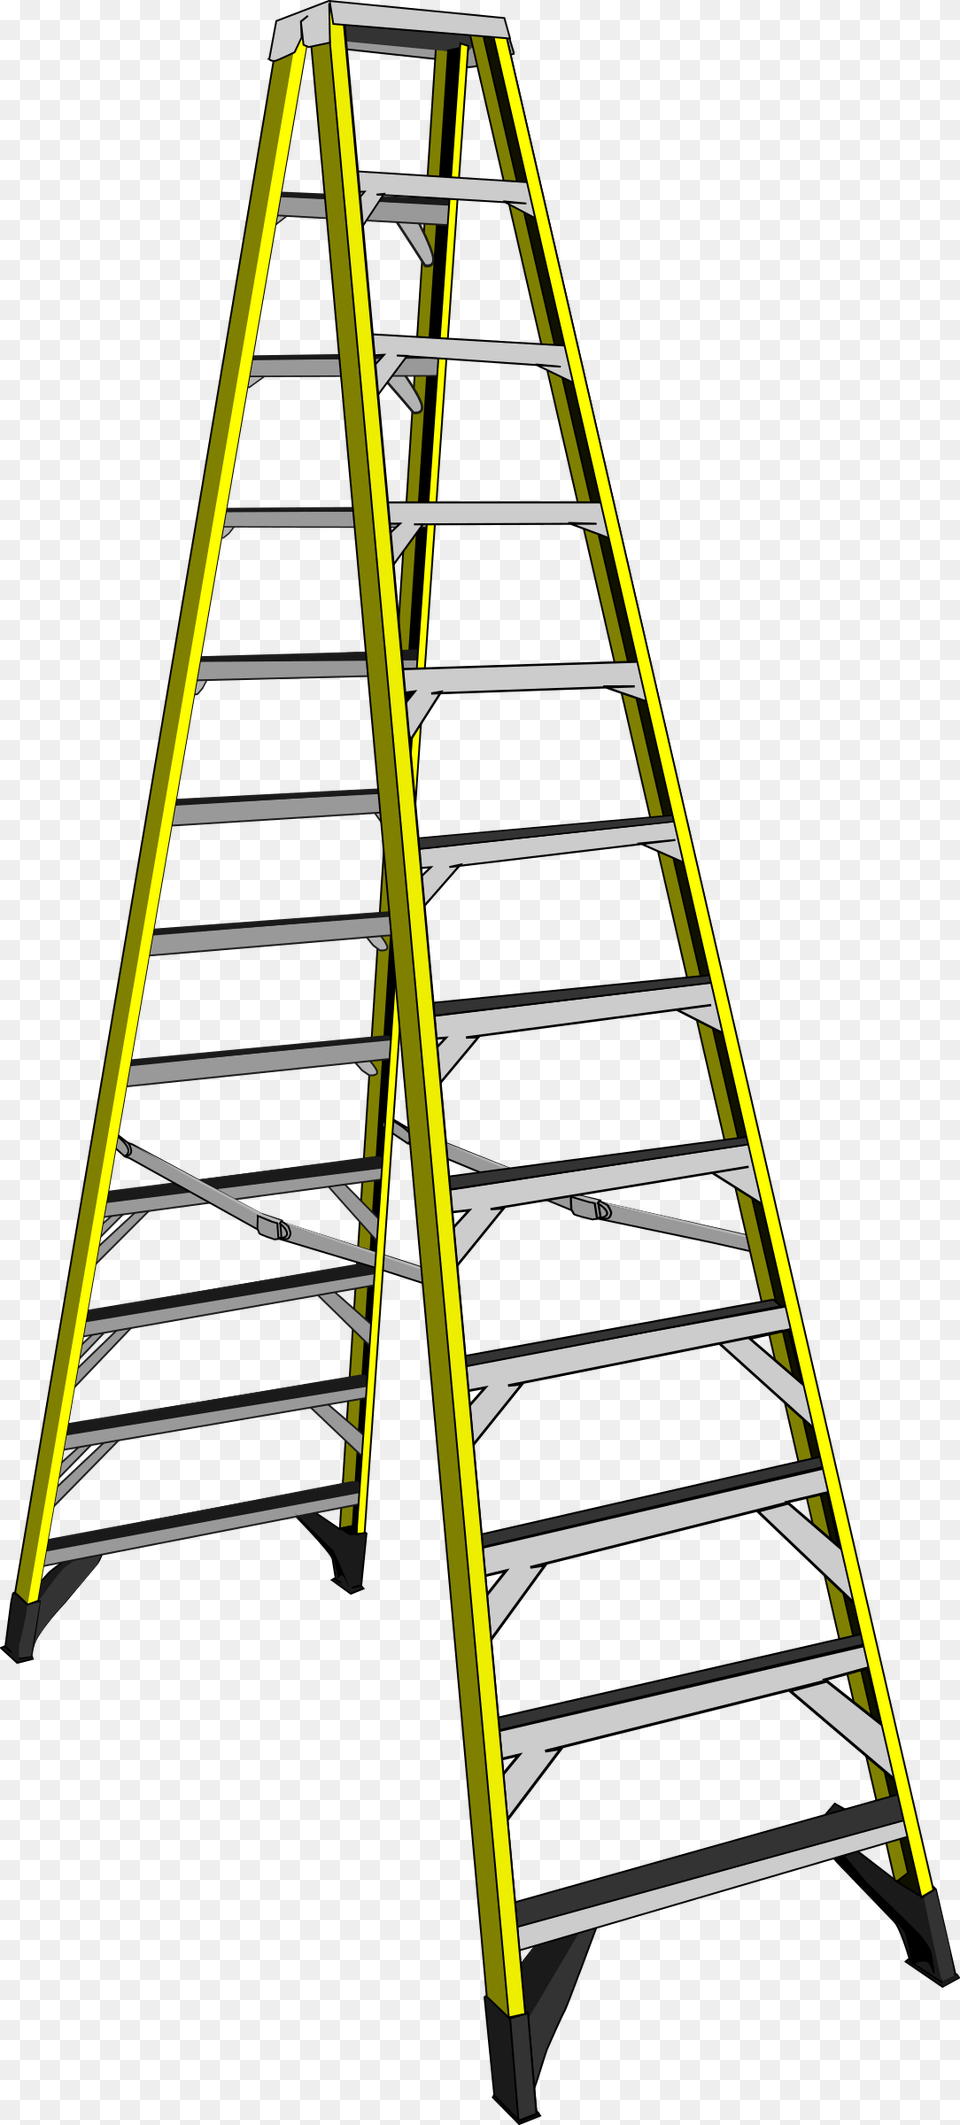 Large Yellow Ladder Icons, Drying Rack Free Transparent Png